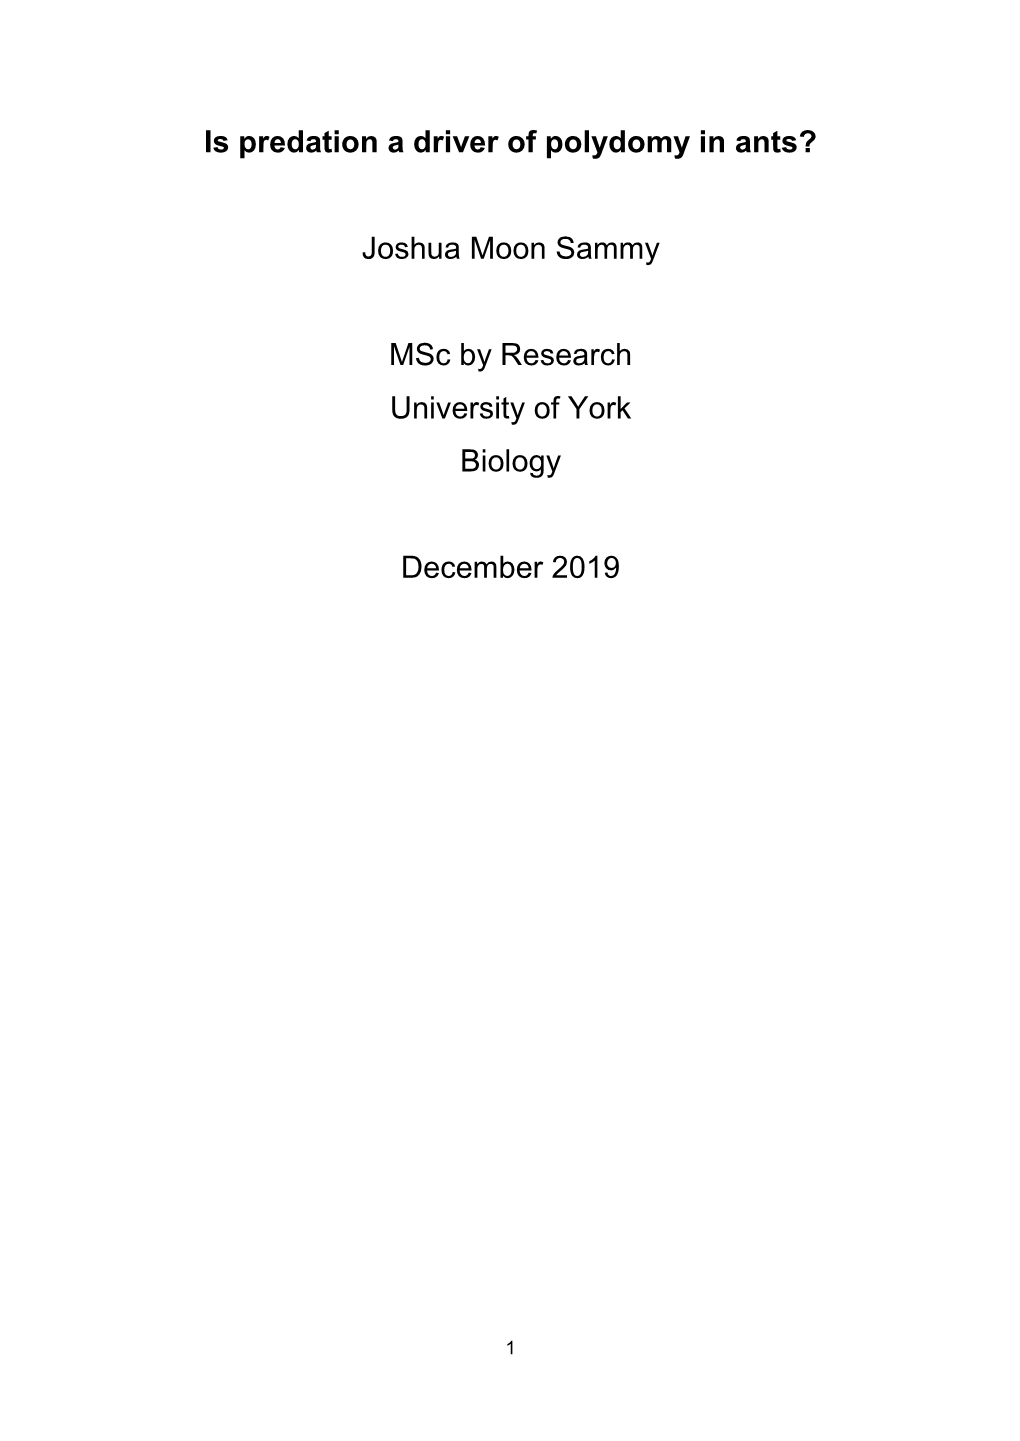 Is Predation a Driver of Polydomy in Ants? Joshua Moon Sammy Msc by Research University of York Biology December 2019